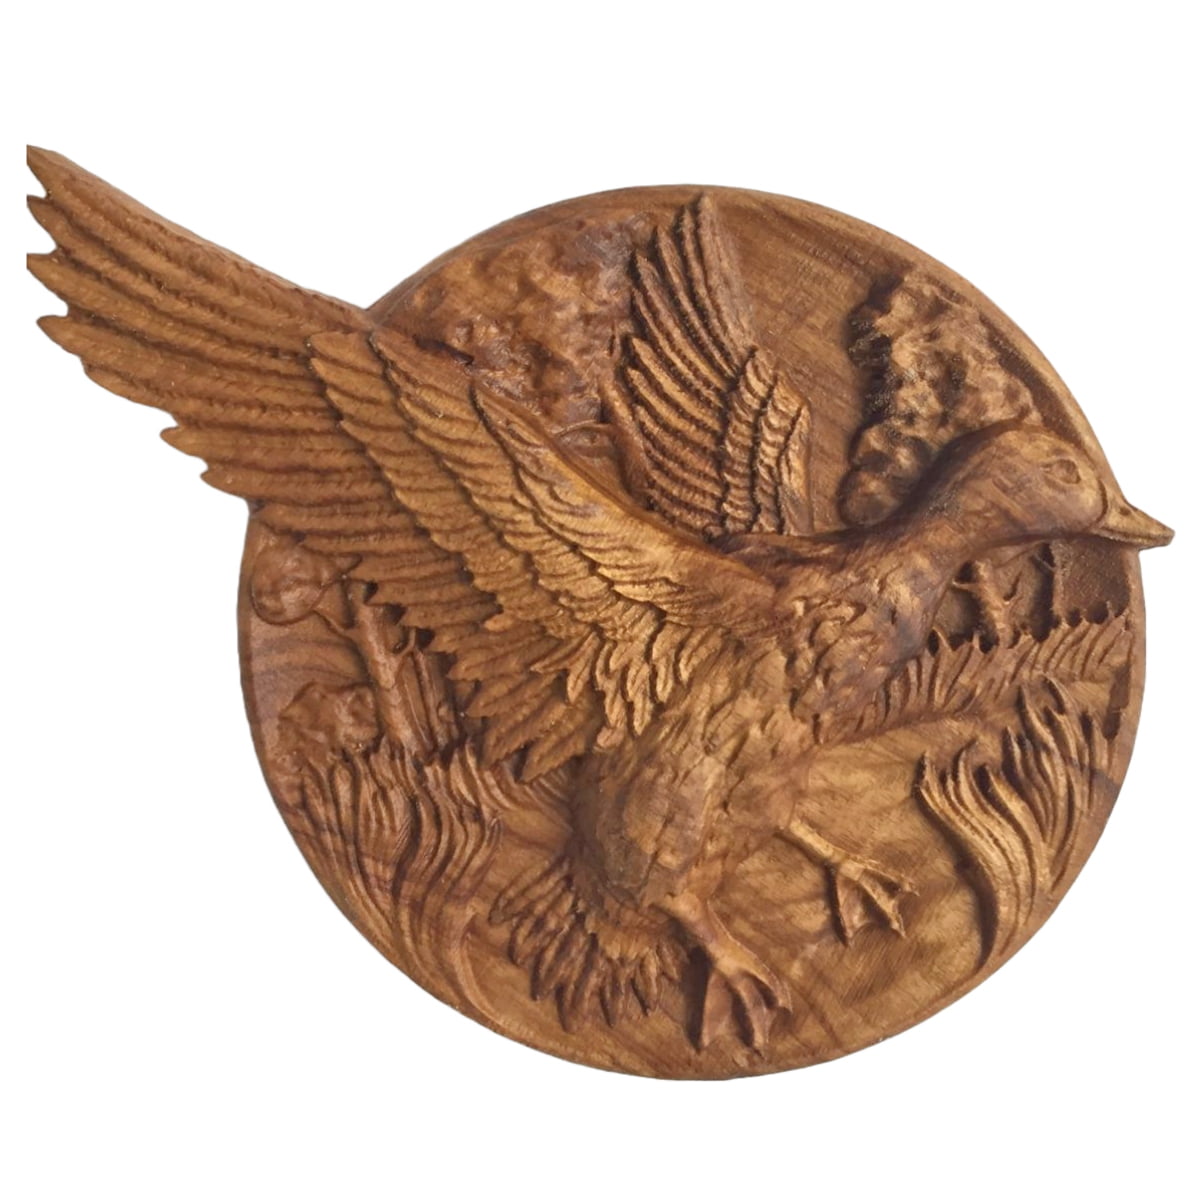 wood carved duck wall art decor wood carving wall hanging sculpture plaque from gitzzy.com